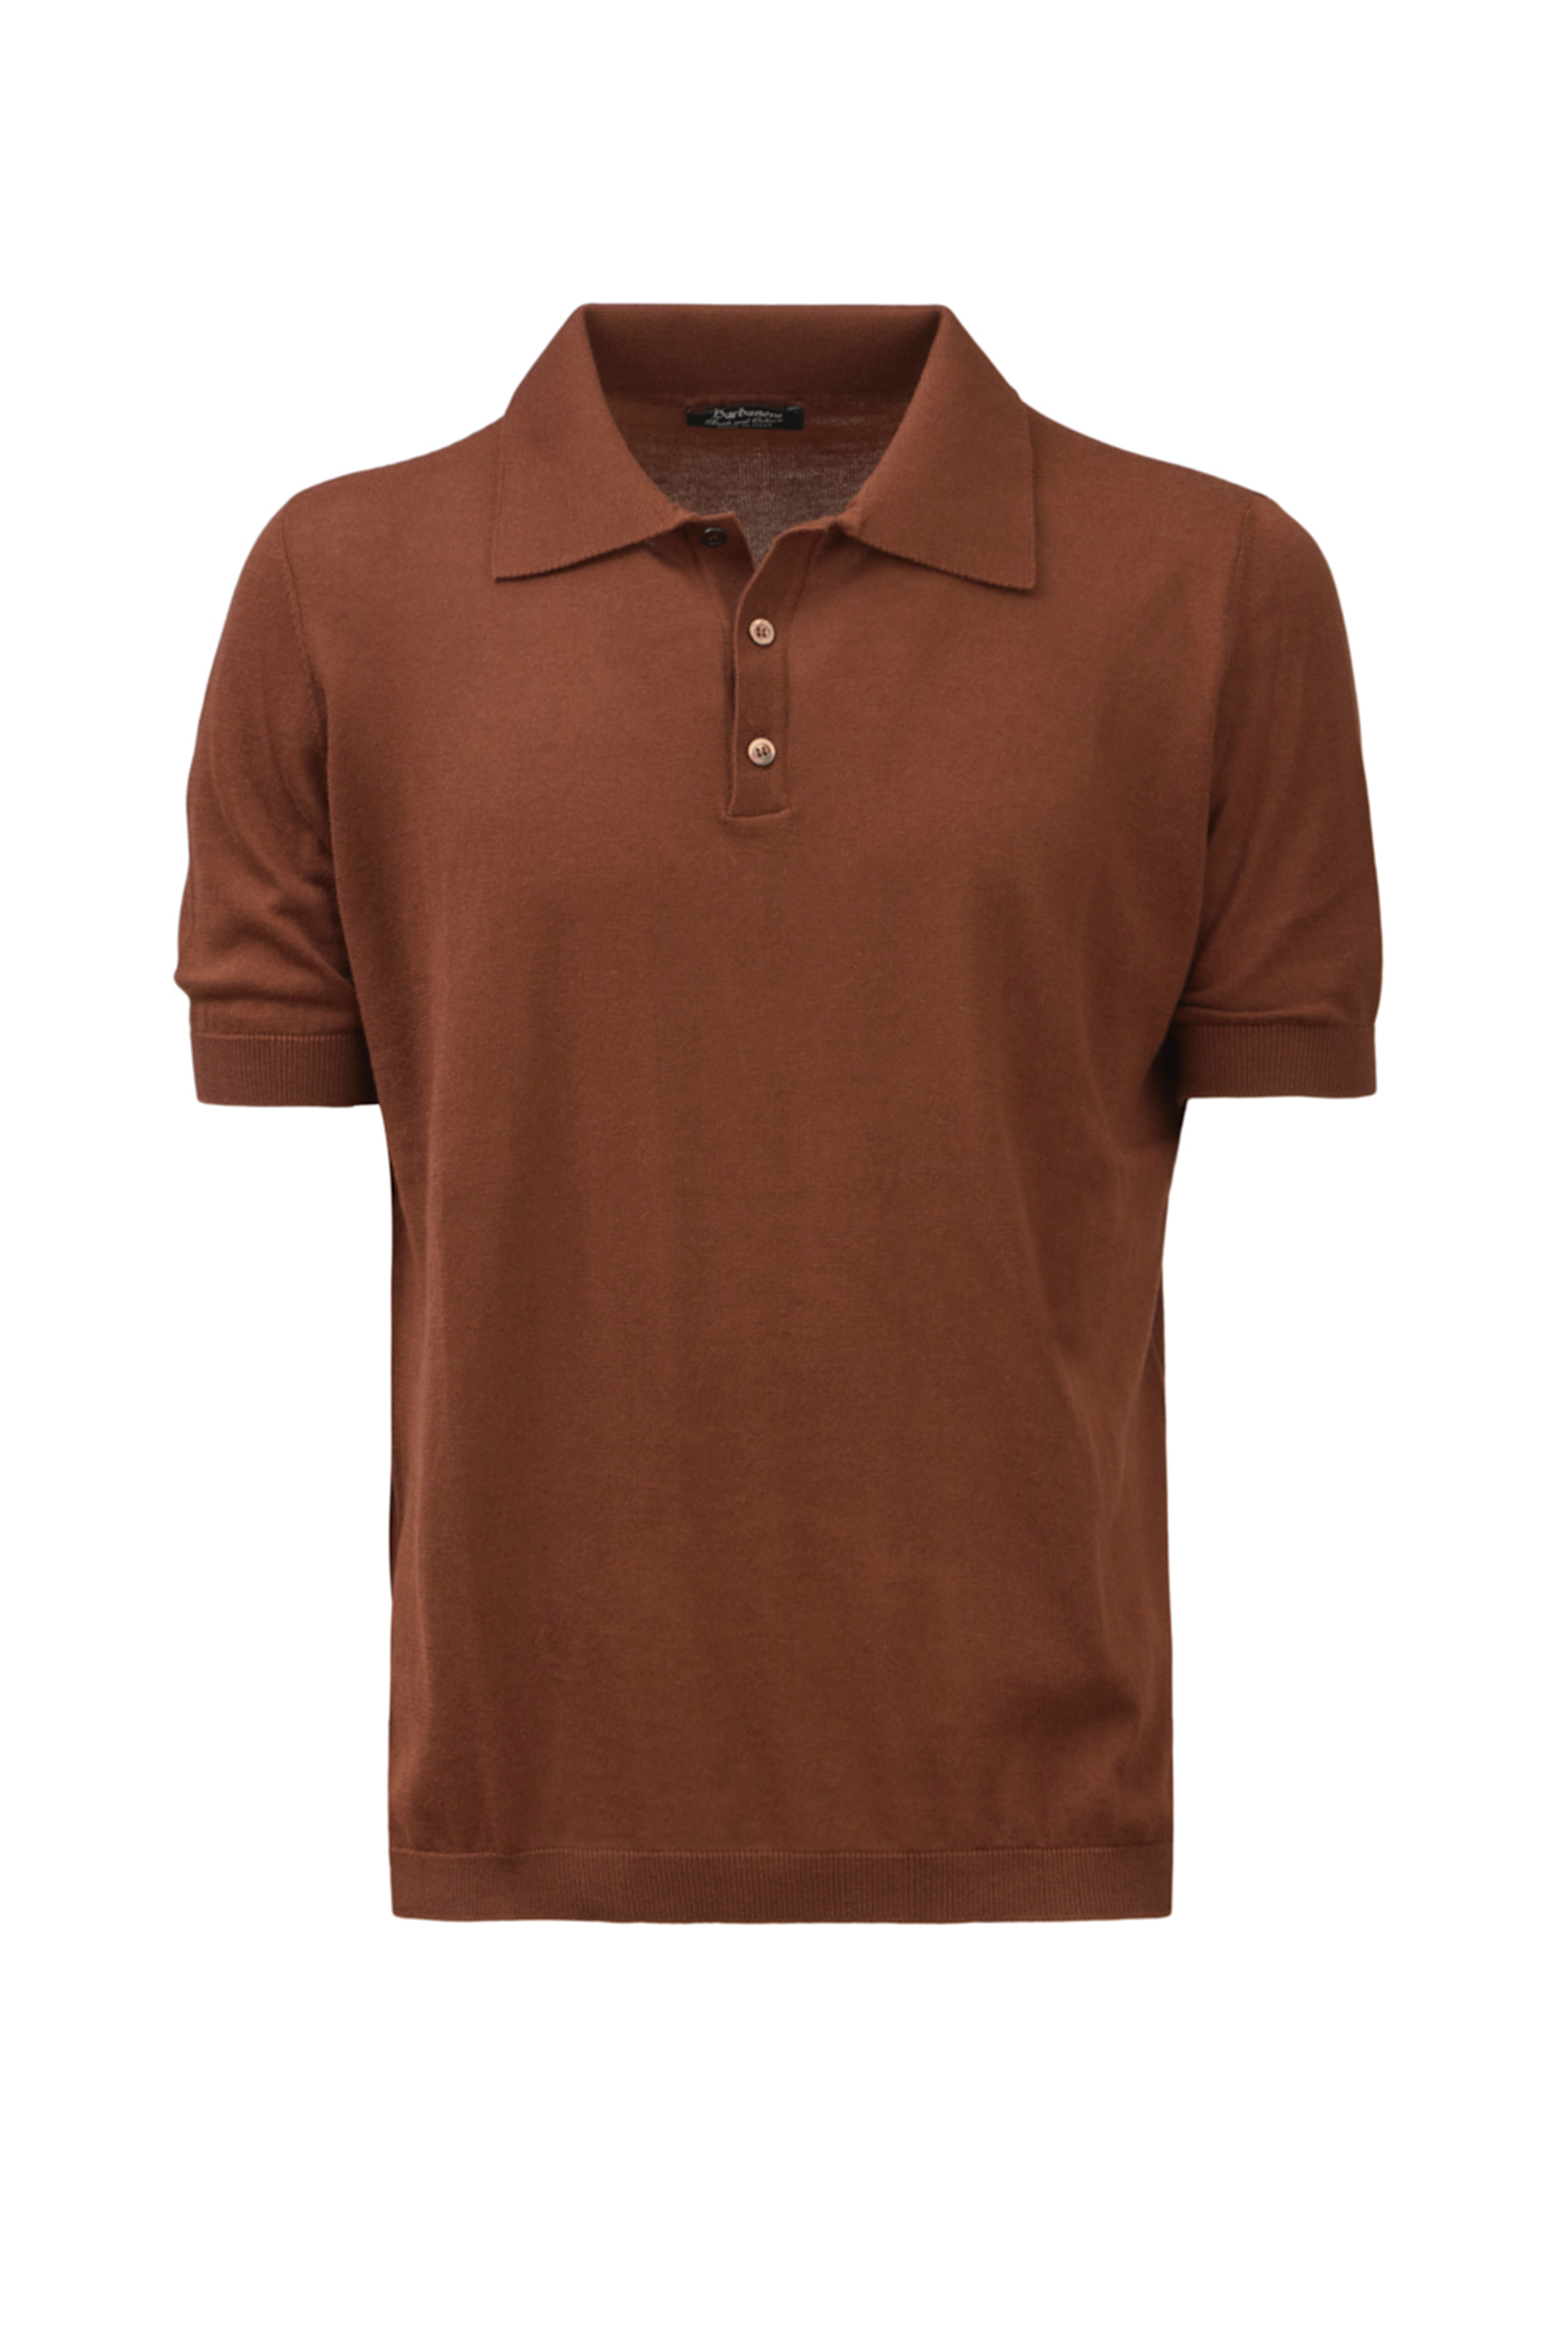 P.P.P. Rust/Brown Knitted Cashmere & Cotton Polo Shirt - Barbanera